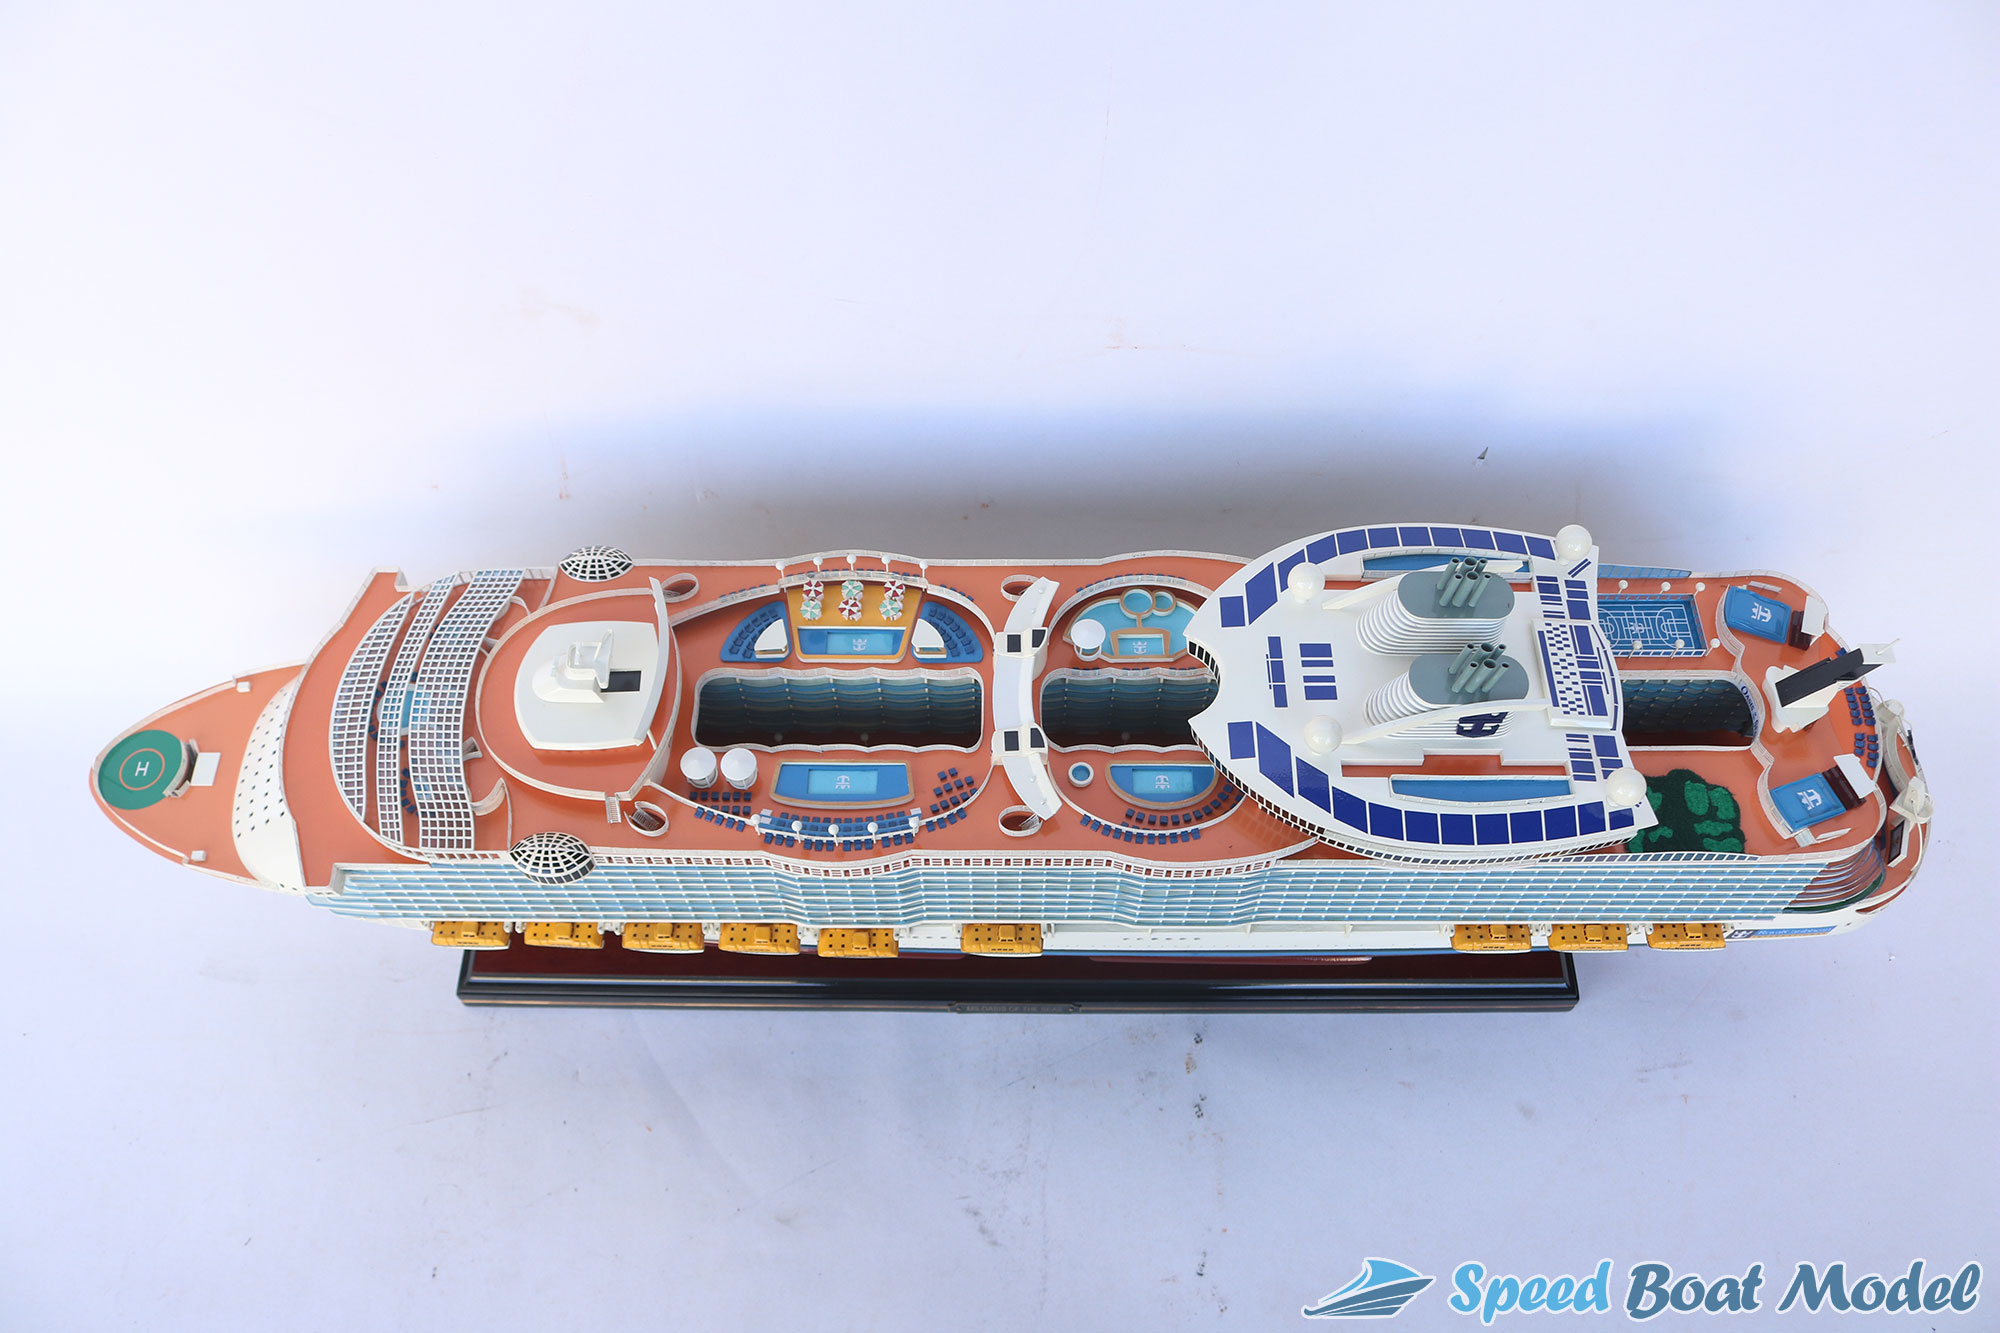 Ms Oasis Of The Seas Cruise Ship Model 35.4